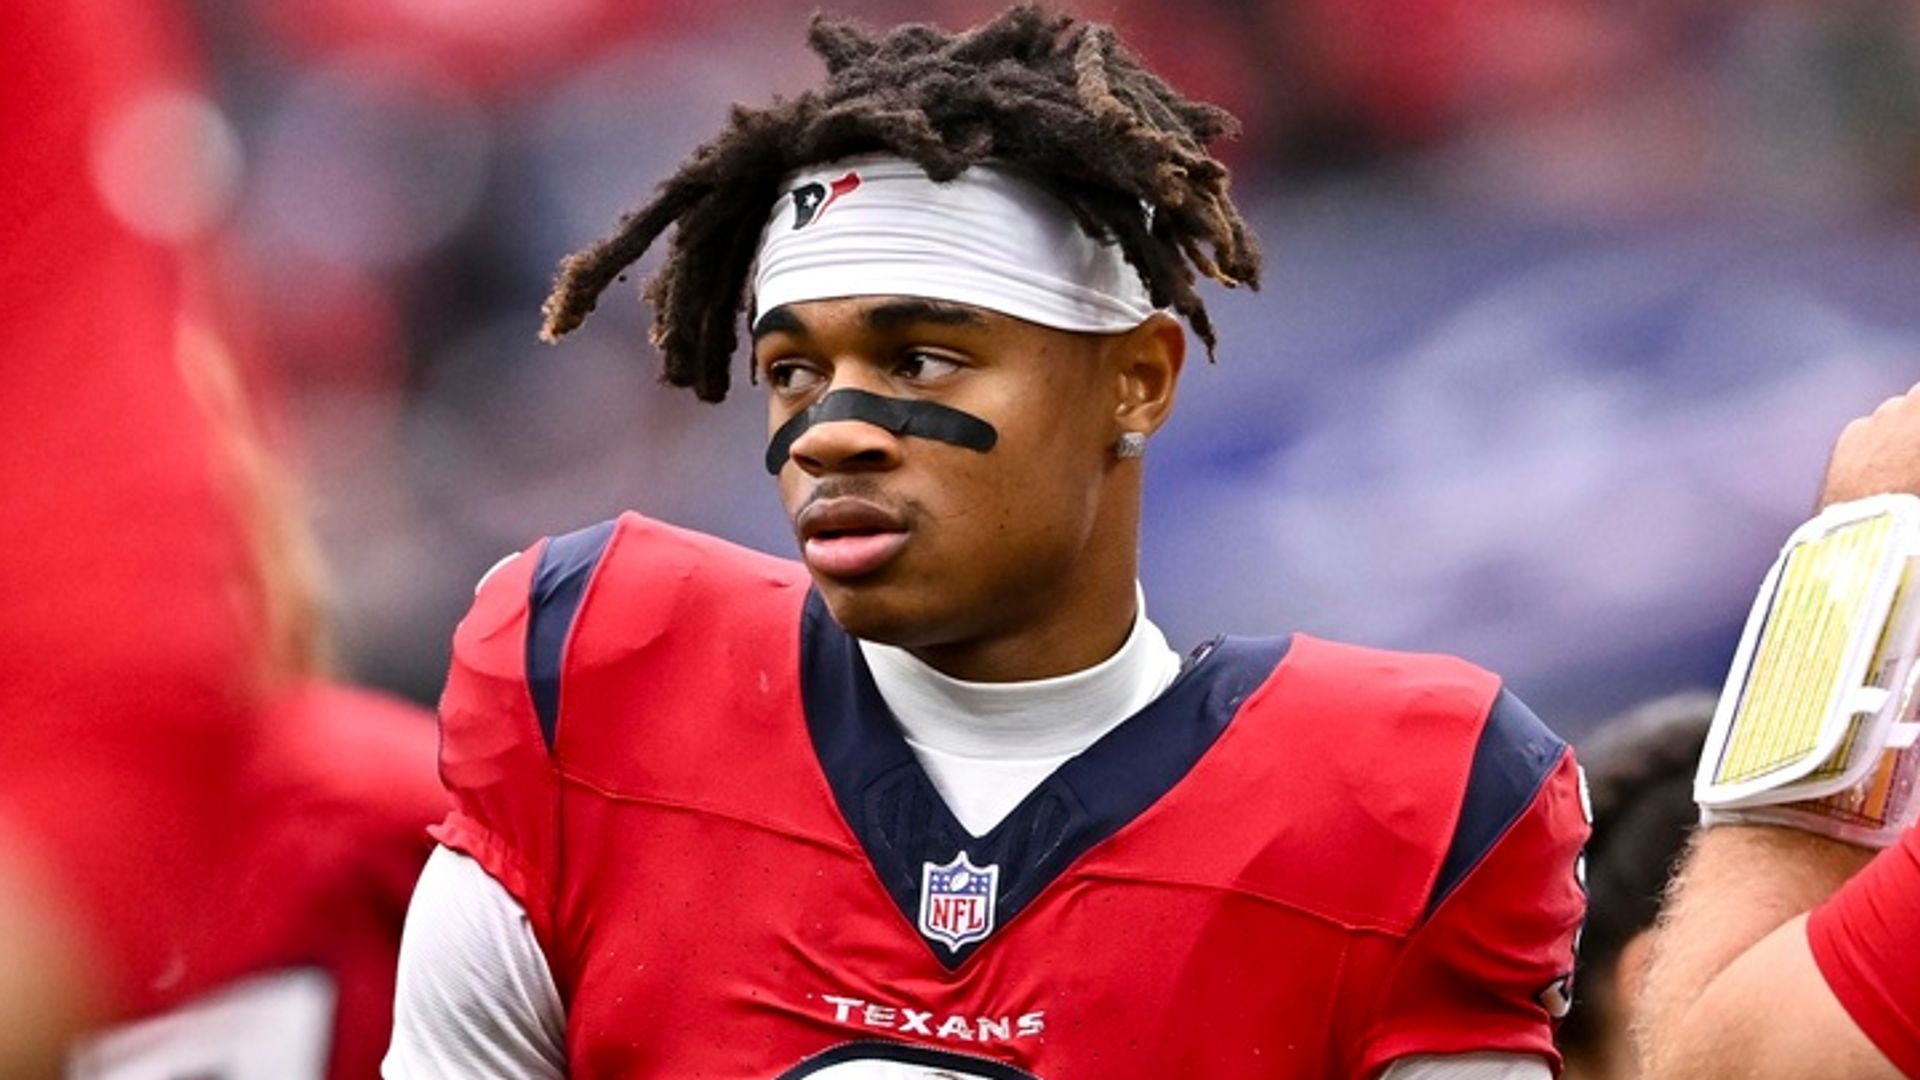 Texans wide receiver Dell wounded in shooting